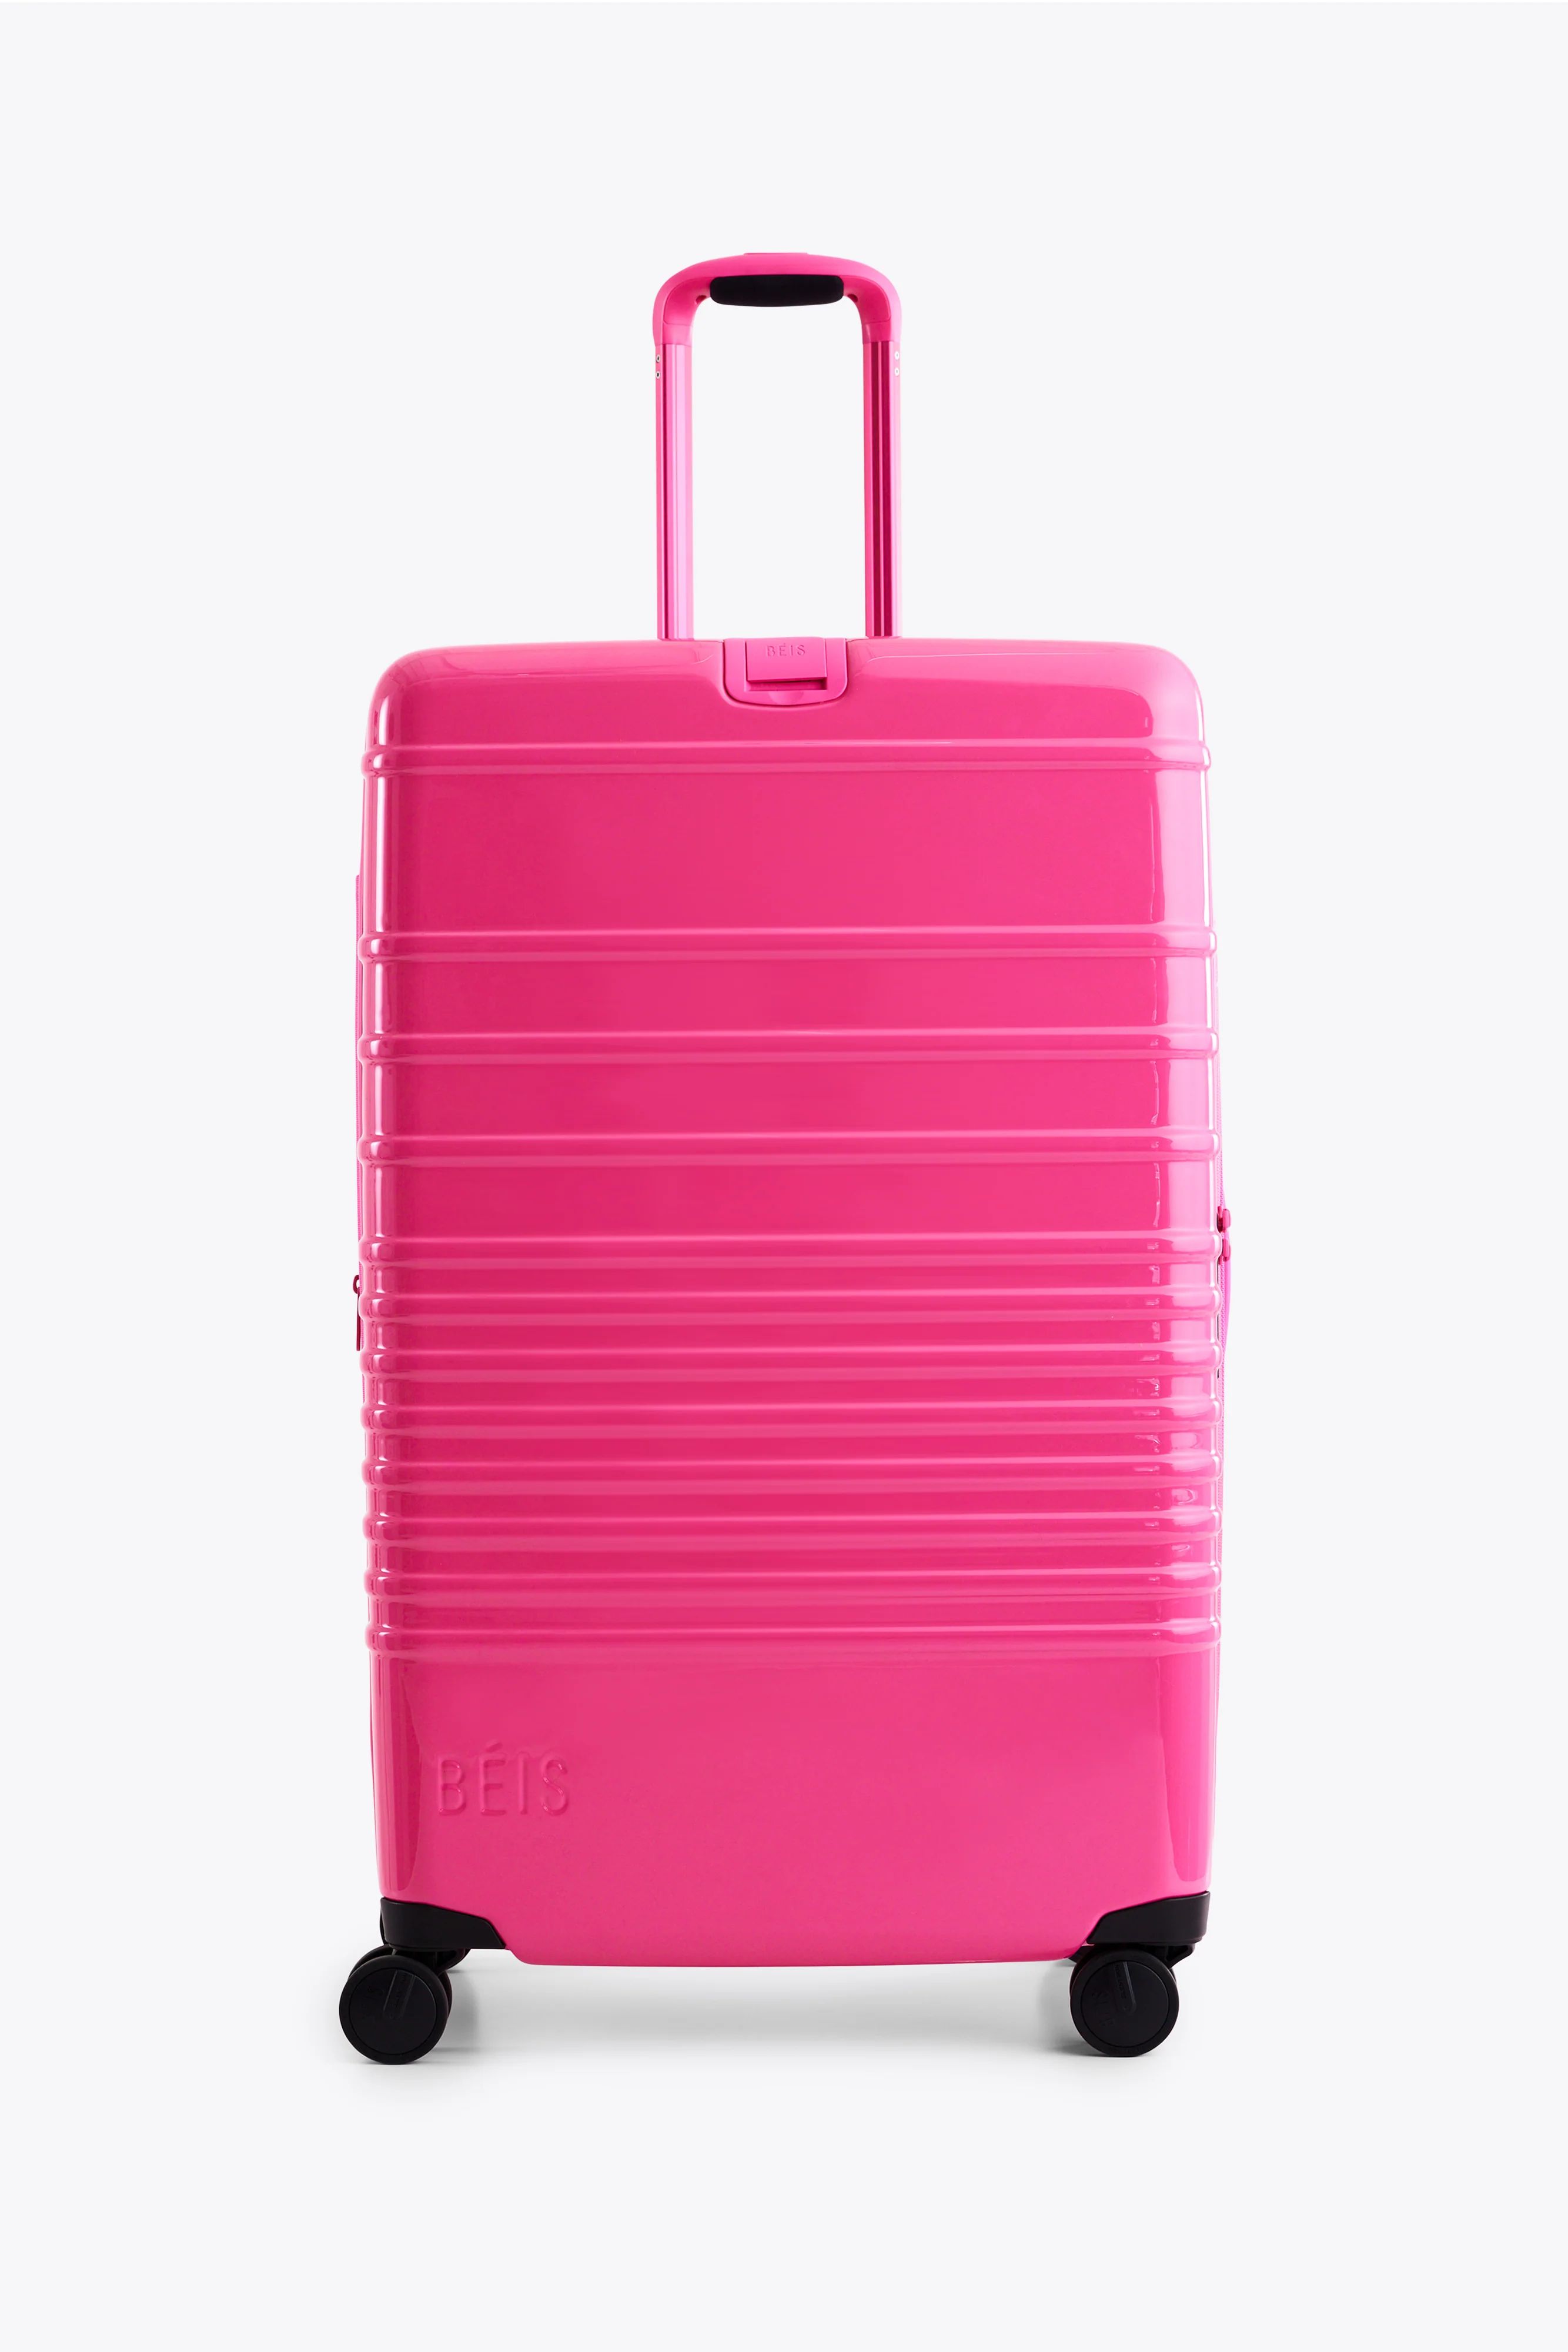 BÉIS 'The Large Check In Roller' in Barbie™ Pink - 29" Large Pink Luggage & Suitcases | BÉIS Travel